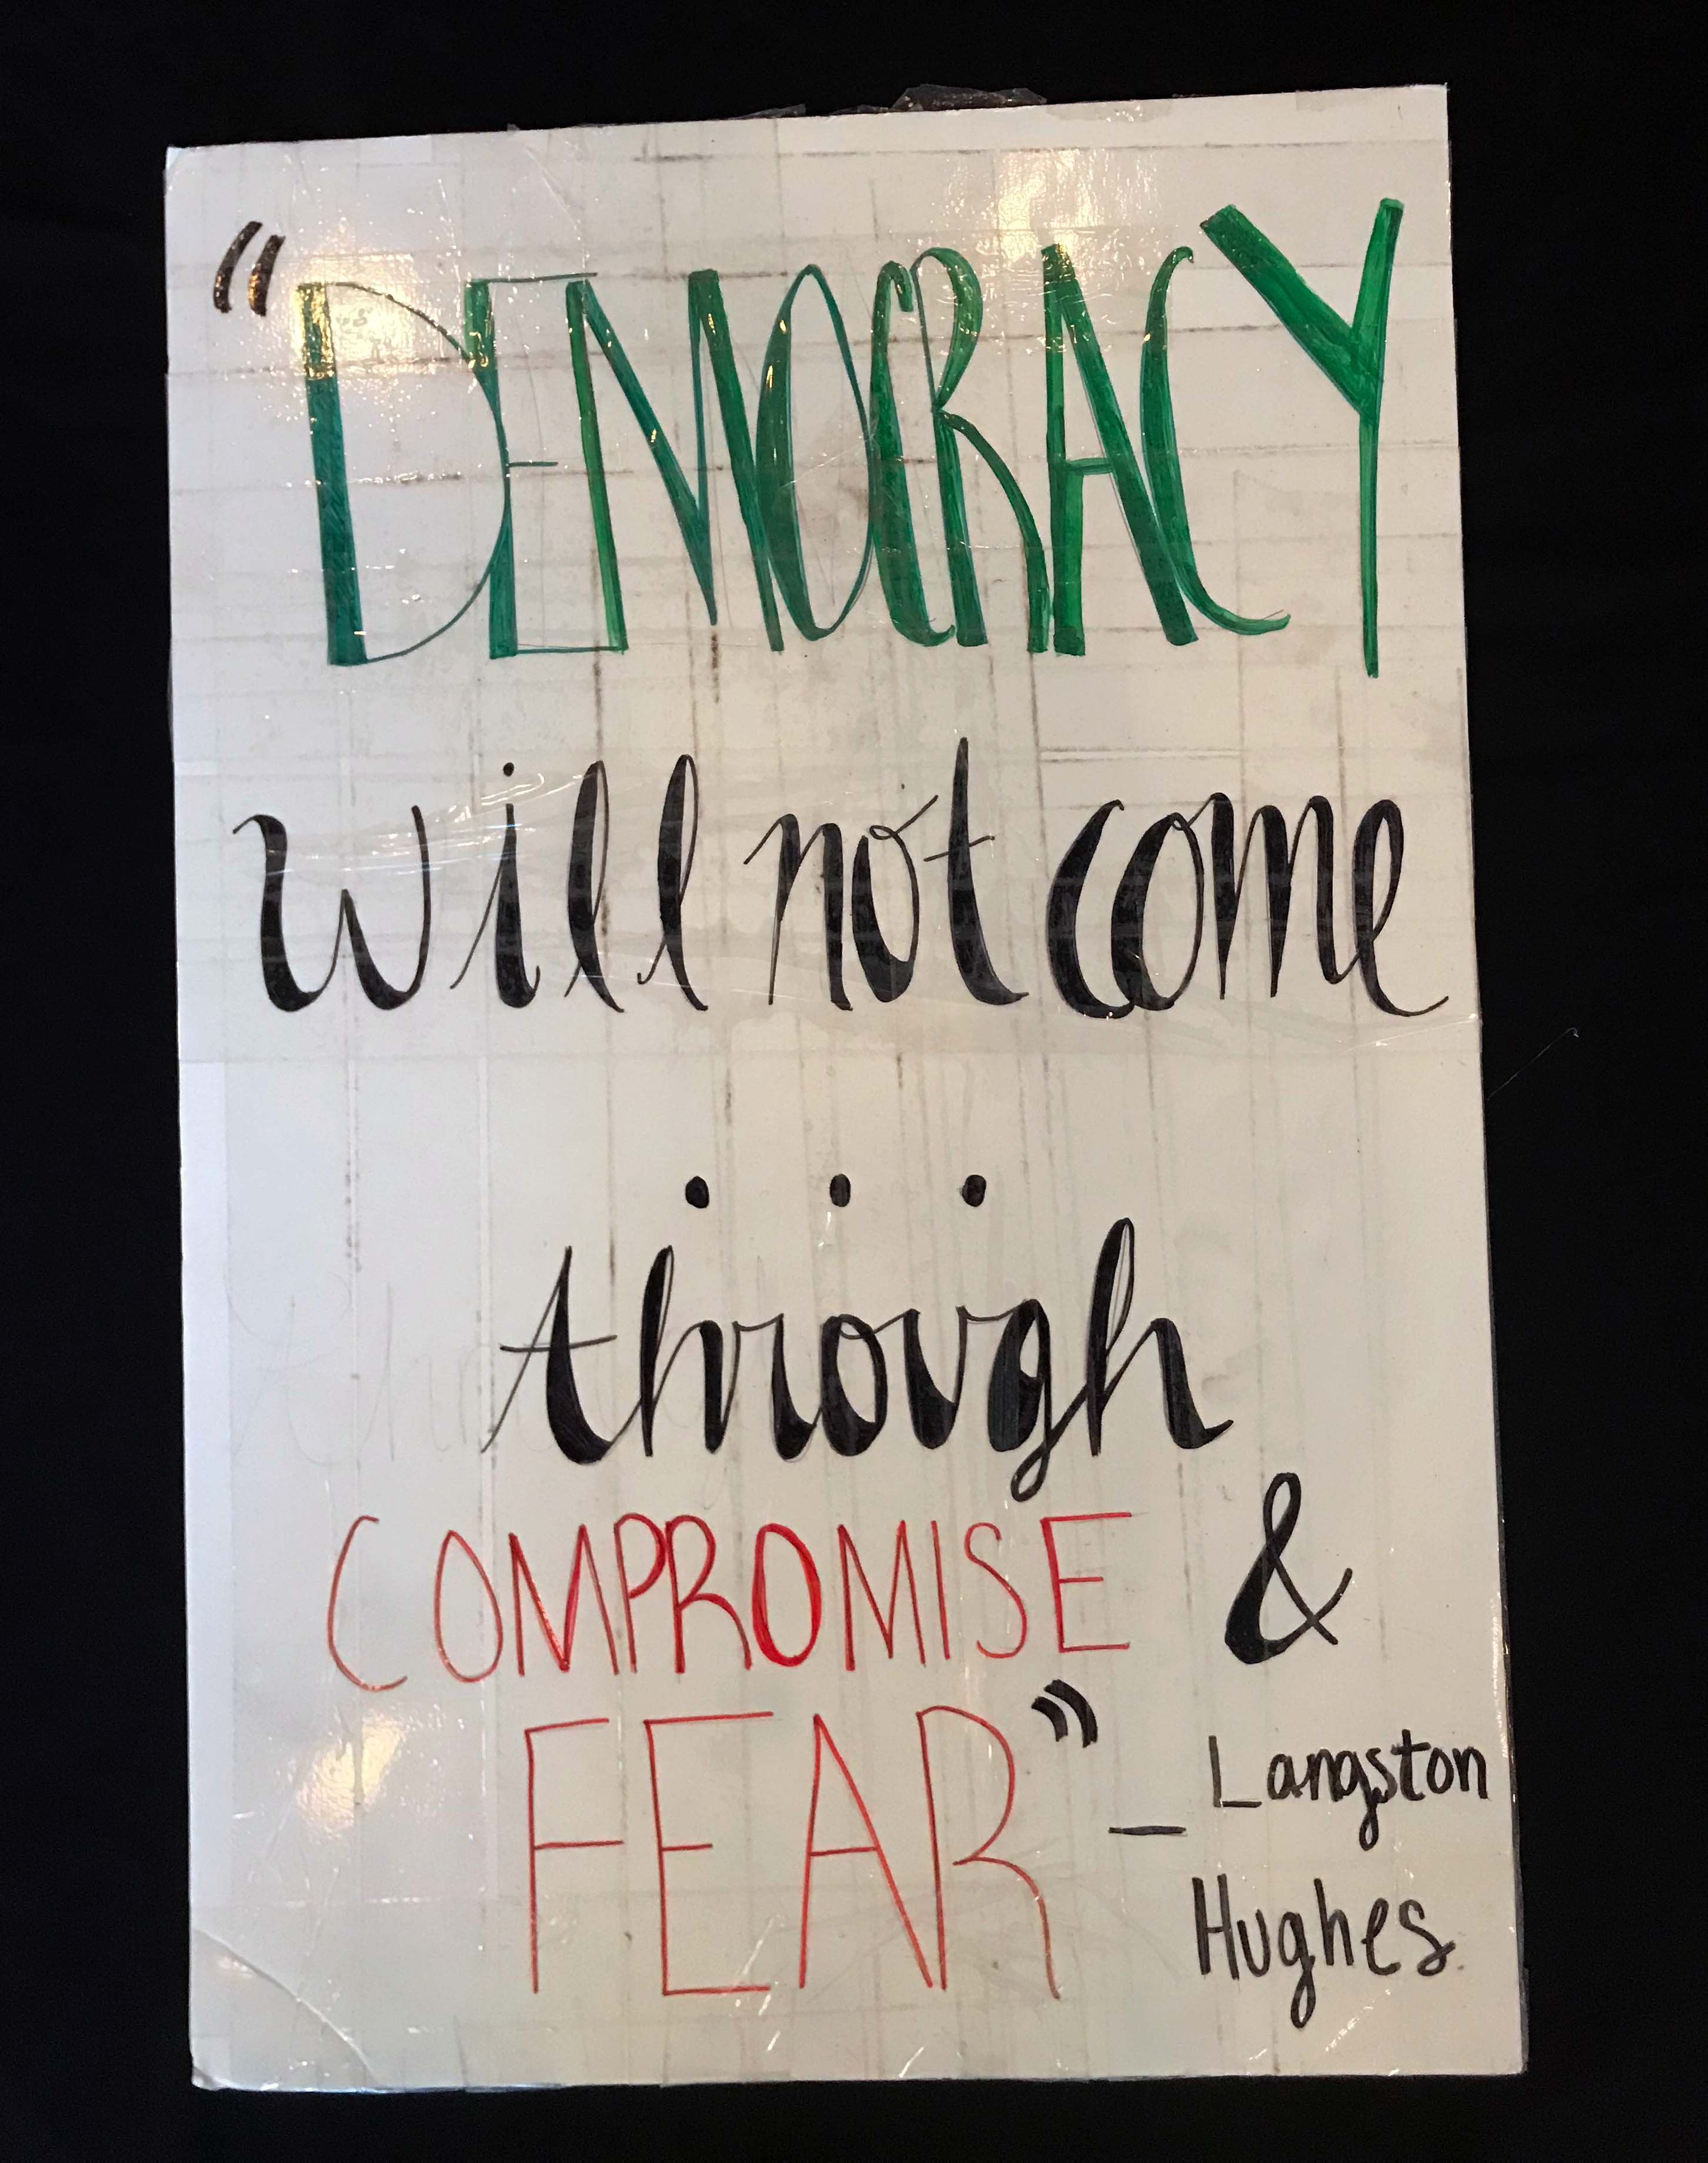 Charlotte March for Our Lives, 2018. Sign reads: "'Democracy will not come through compromise and fear.' - Langston Hughes"